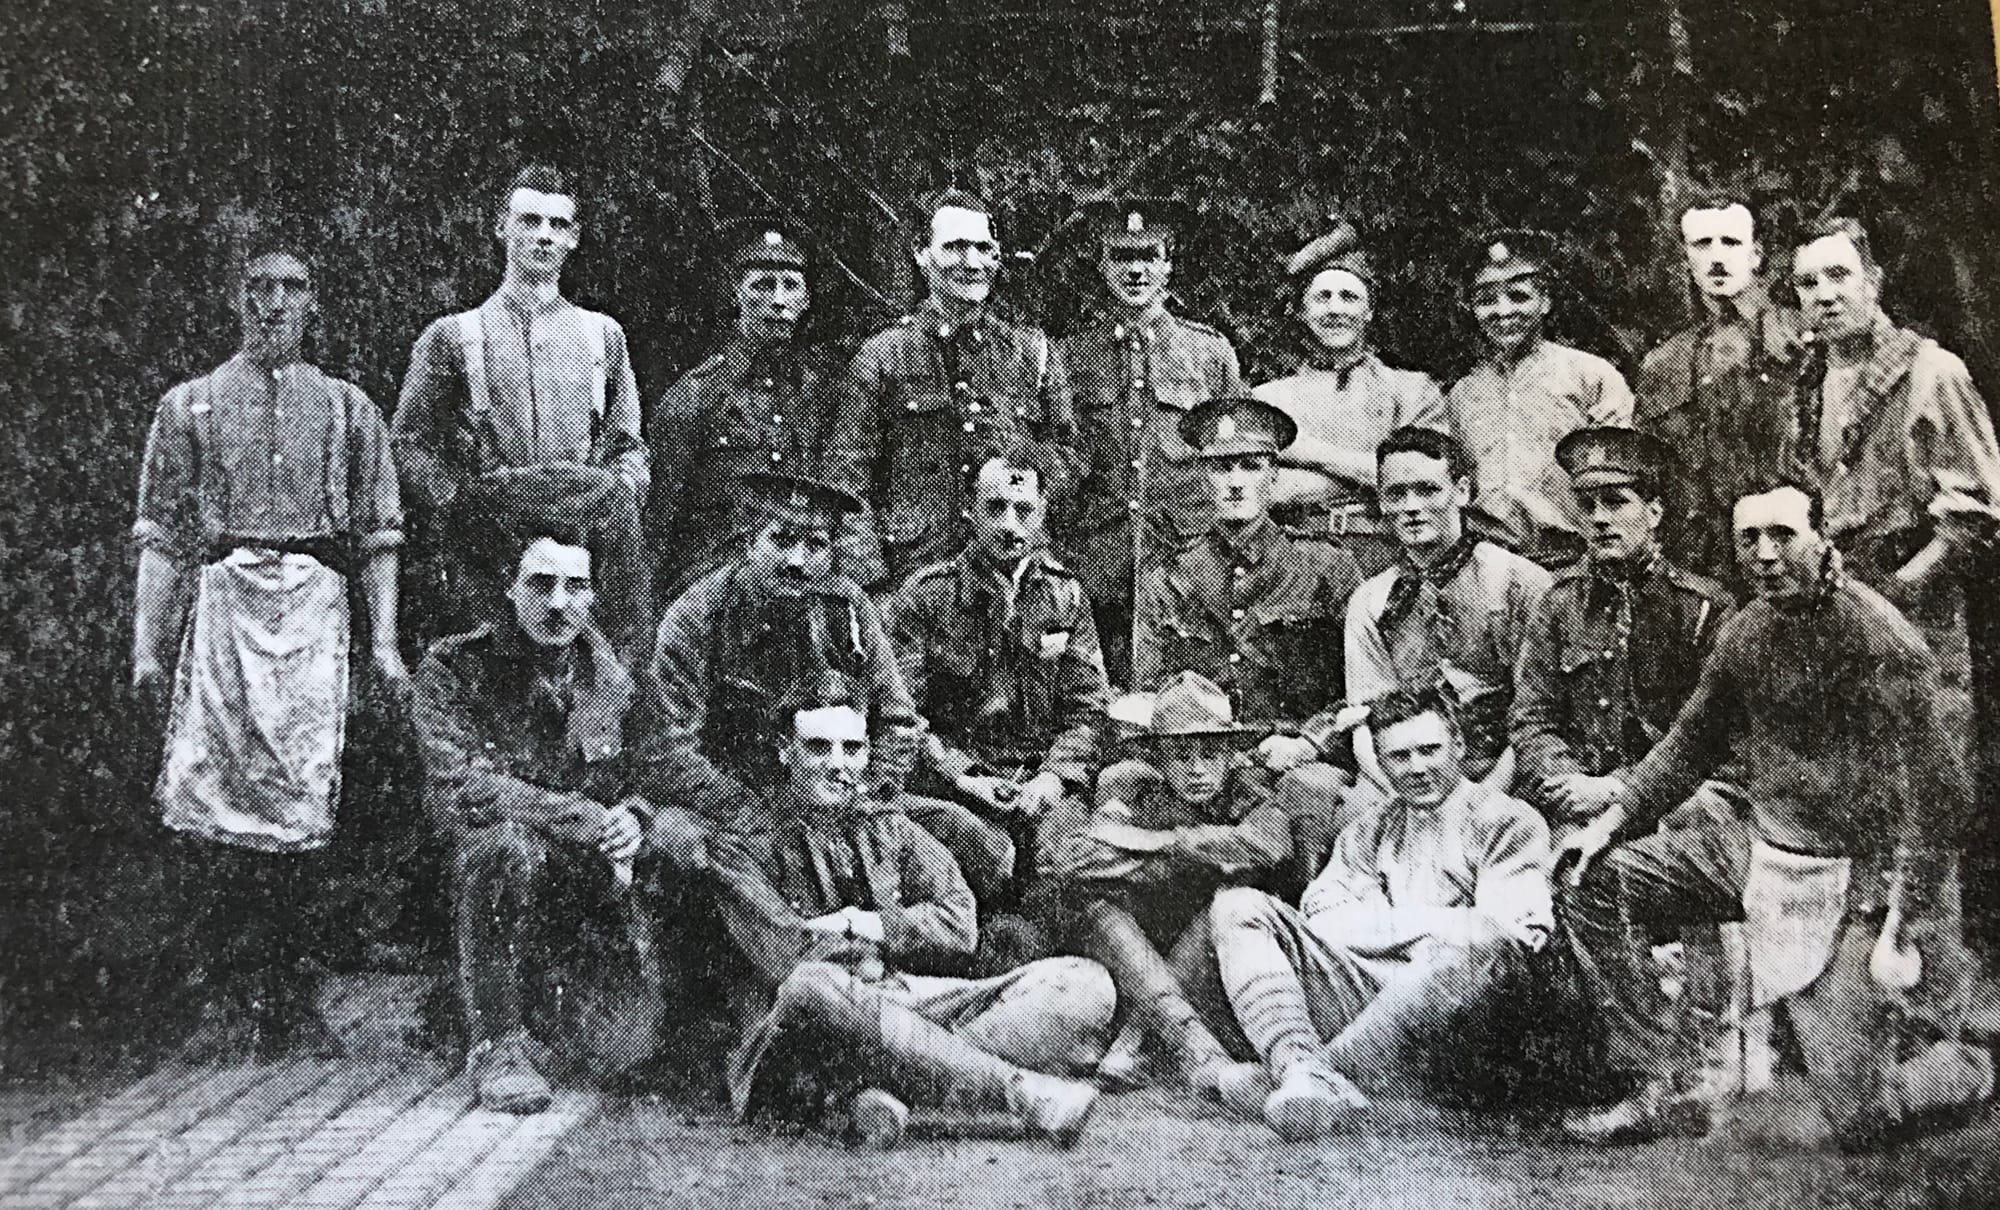 CAMERON, Arthur Garfield. Lieutenant KEH. Seated third from right, middle row.